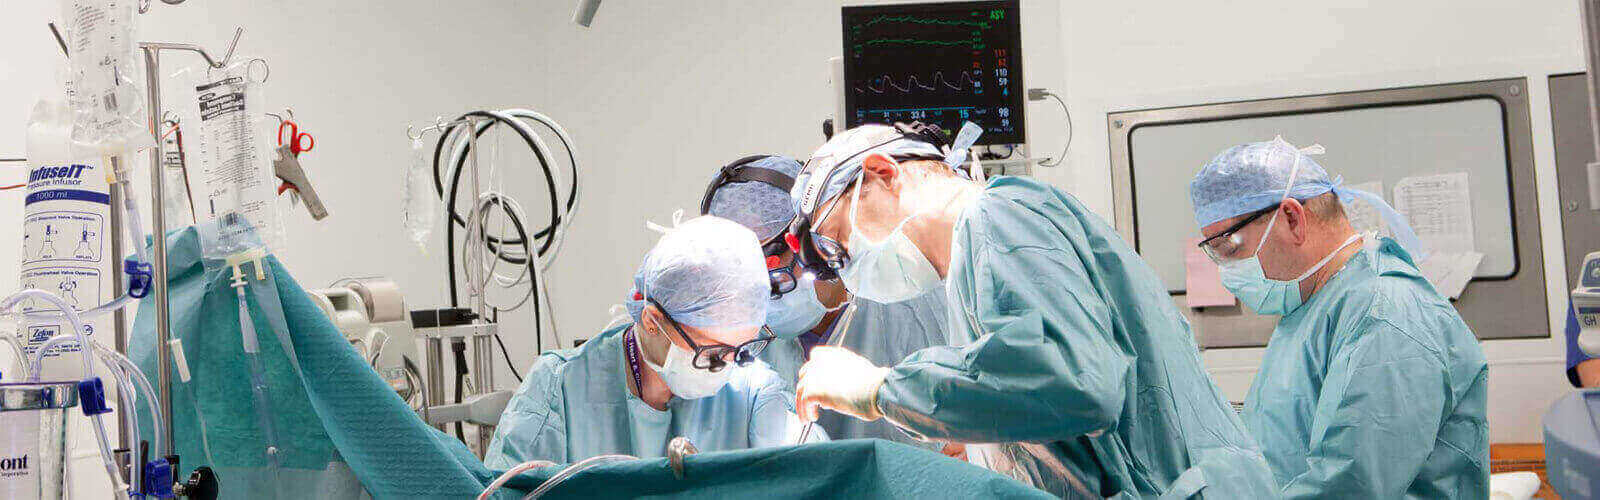 Heart Surgery Or Cardiac Surgery in Liverpool